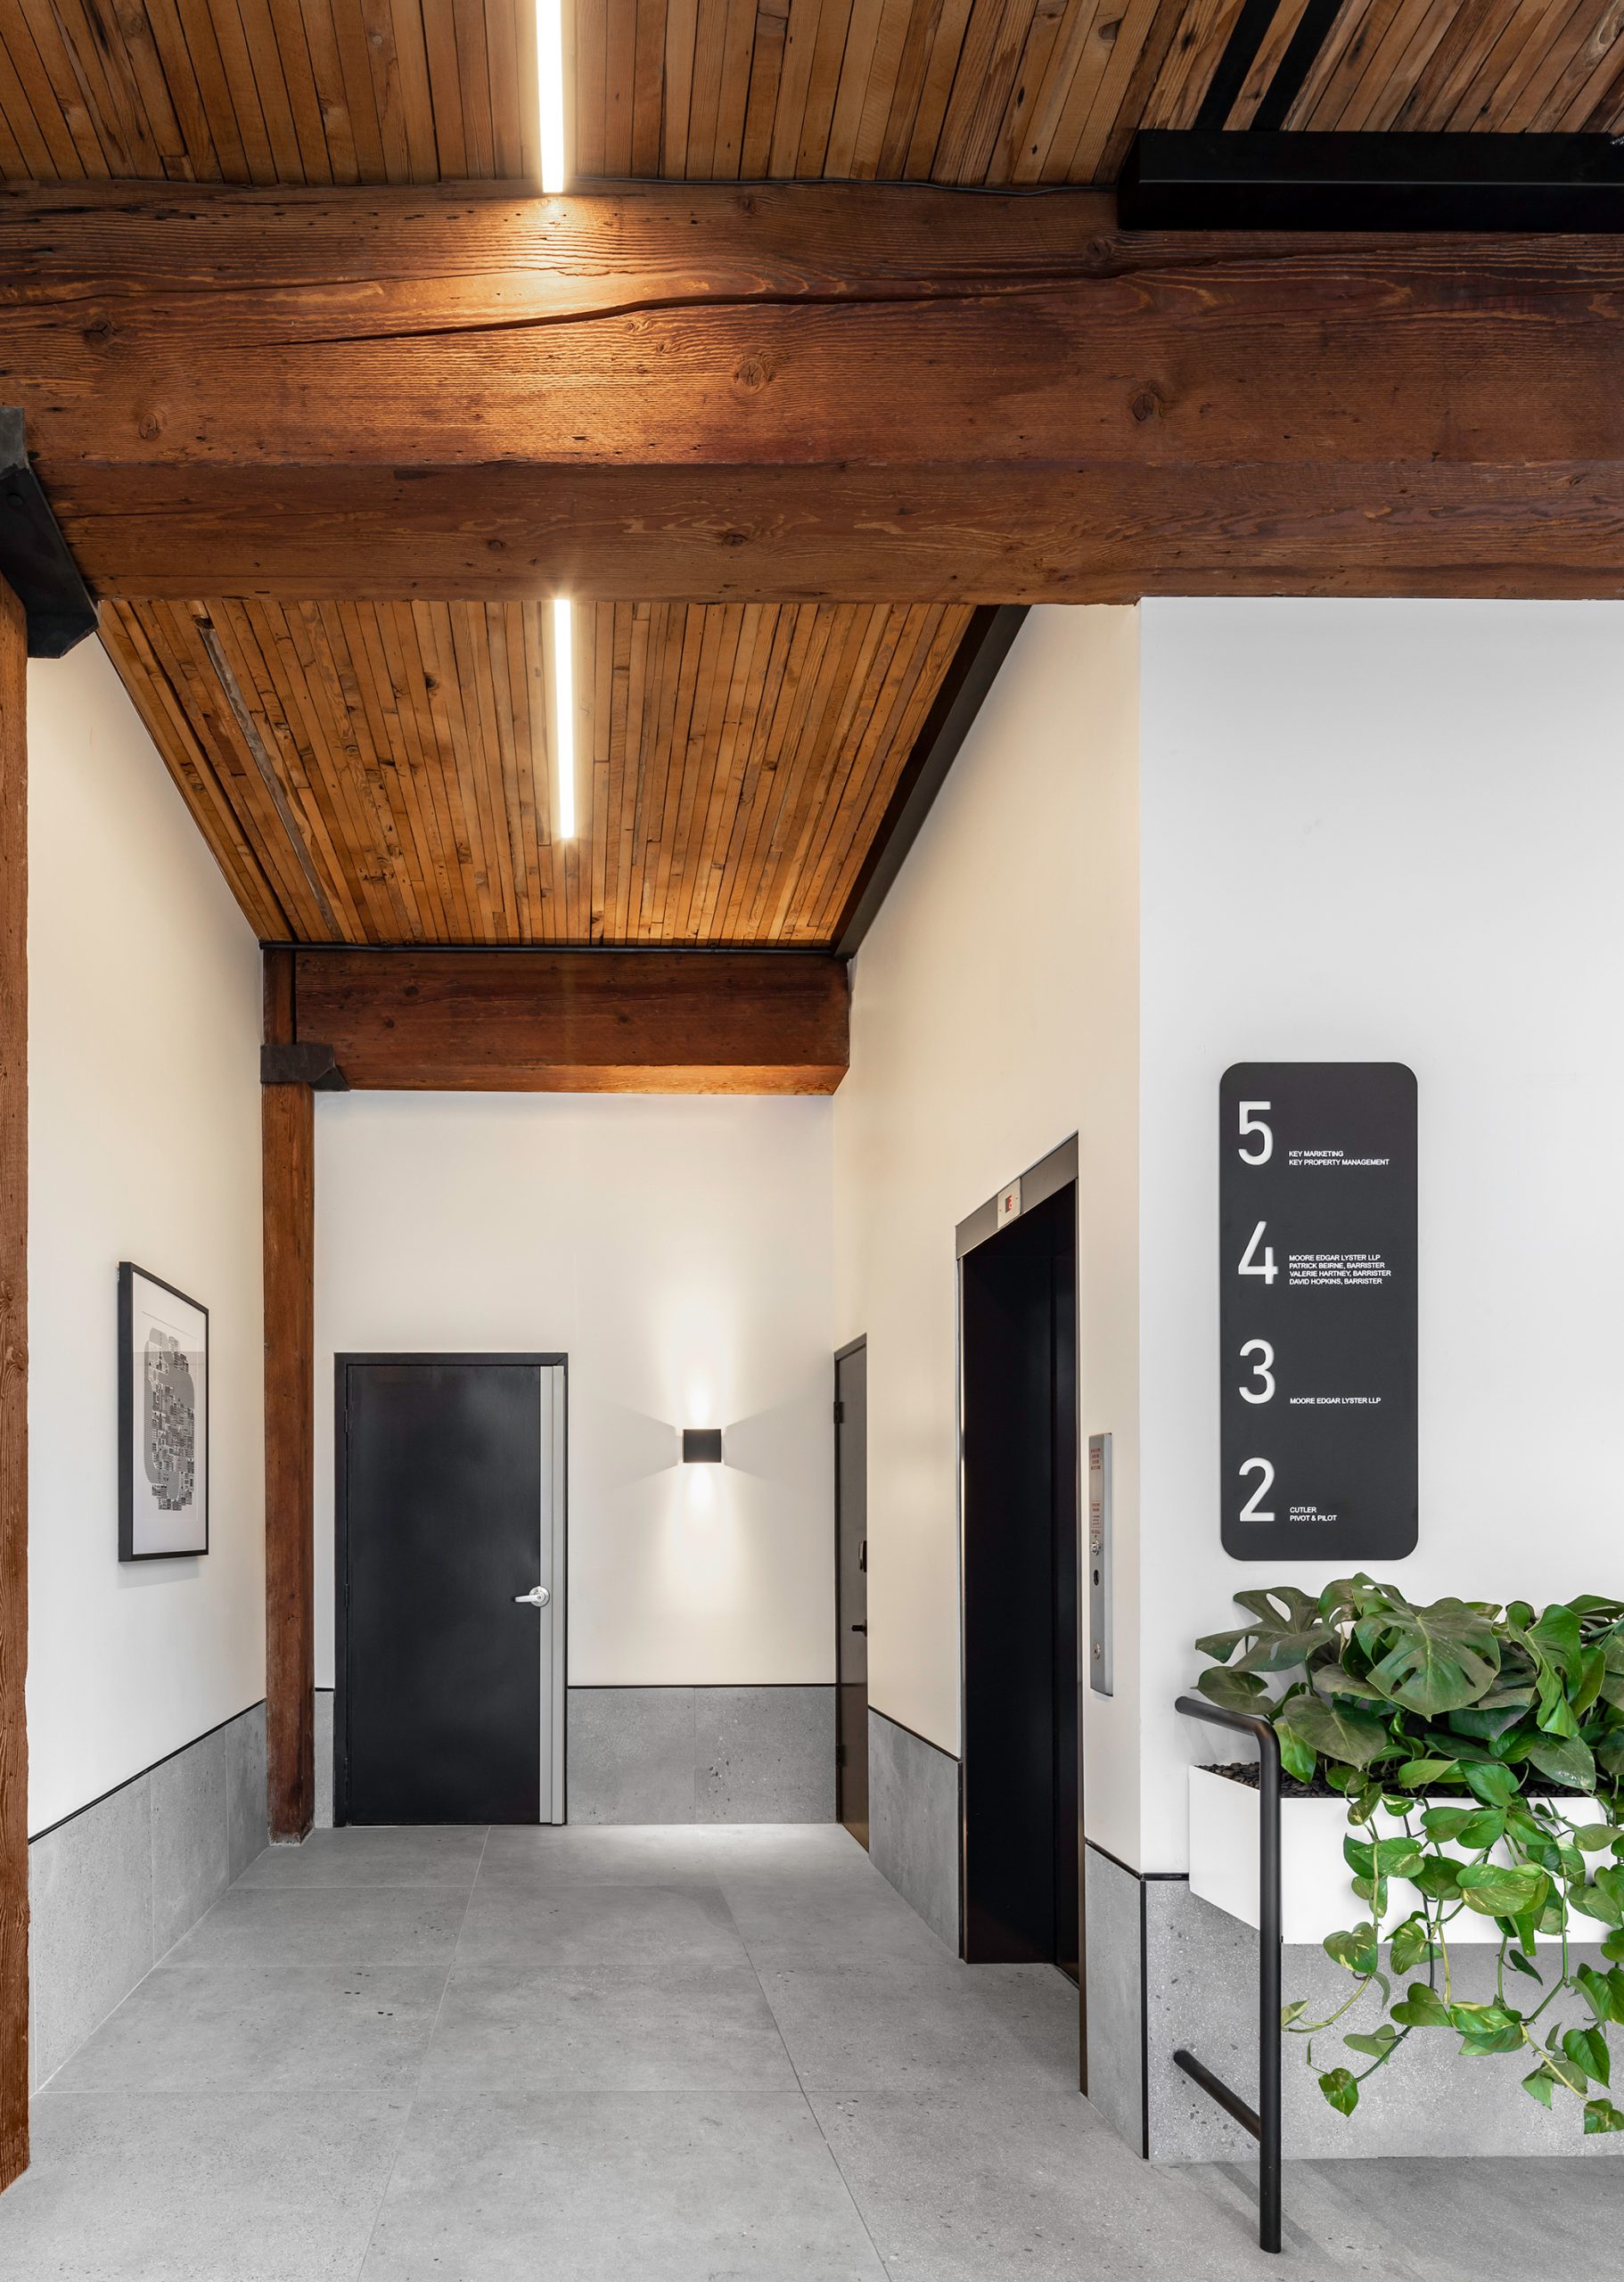 Interior office building design in Vancouver showing entry way, elevators, plants, and signage